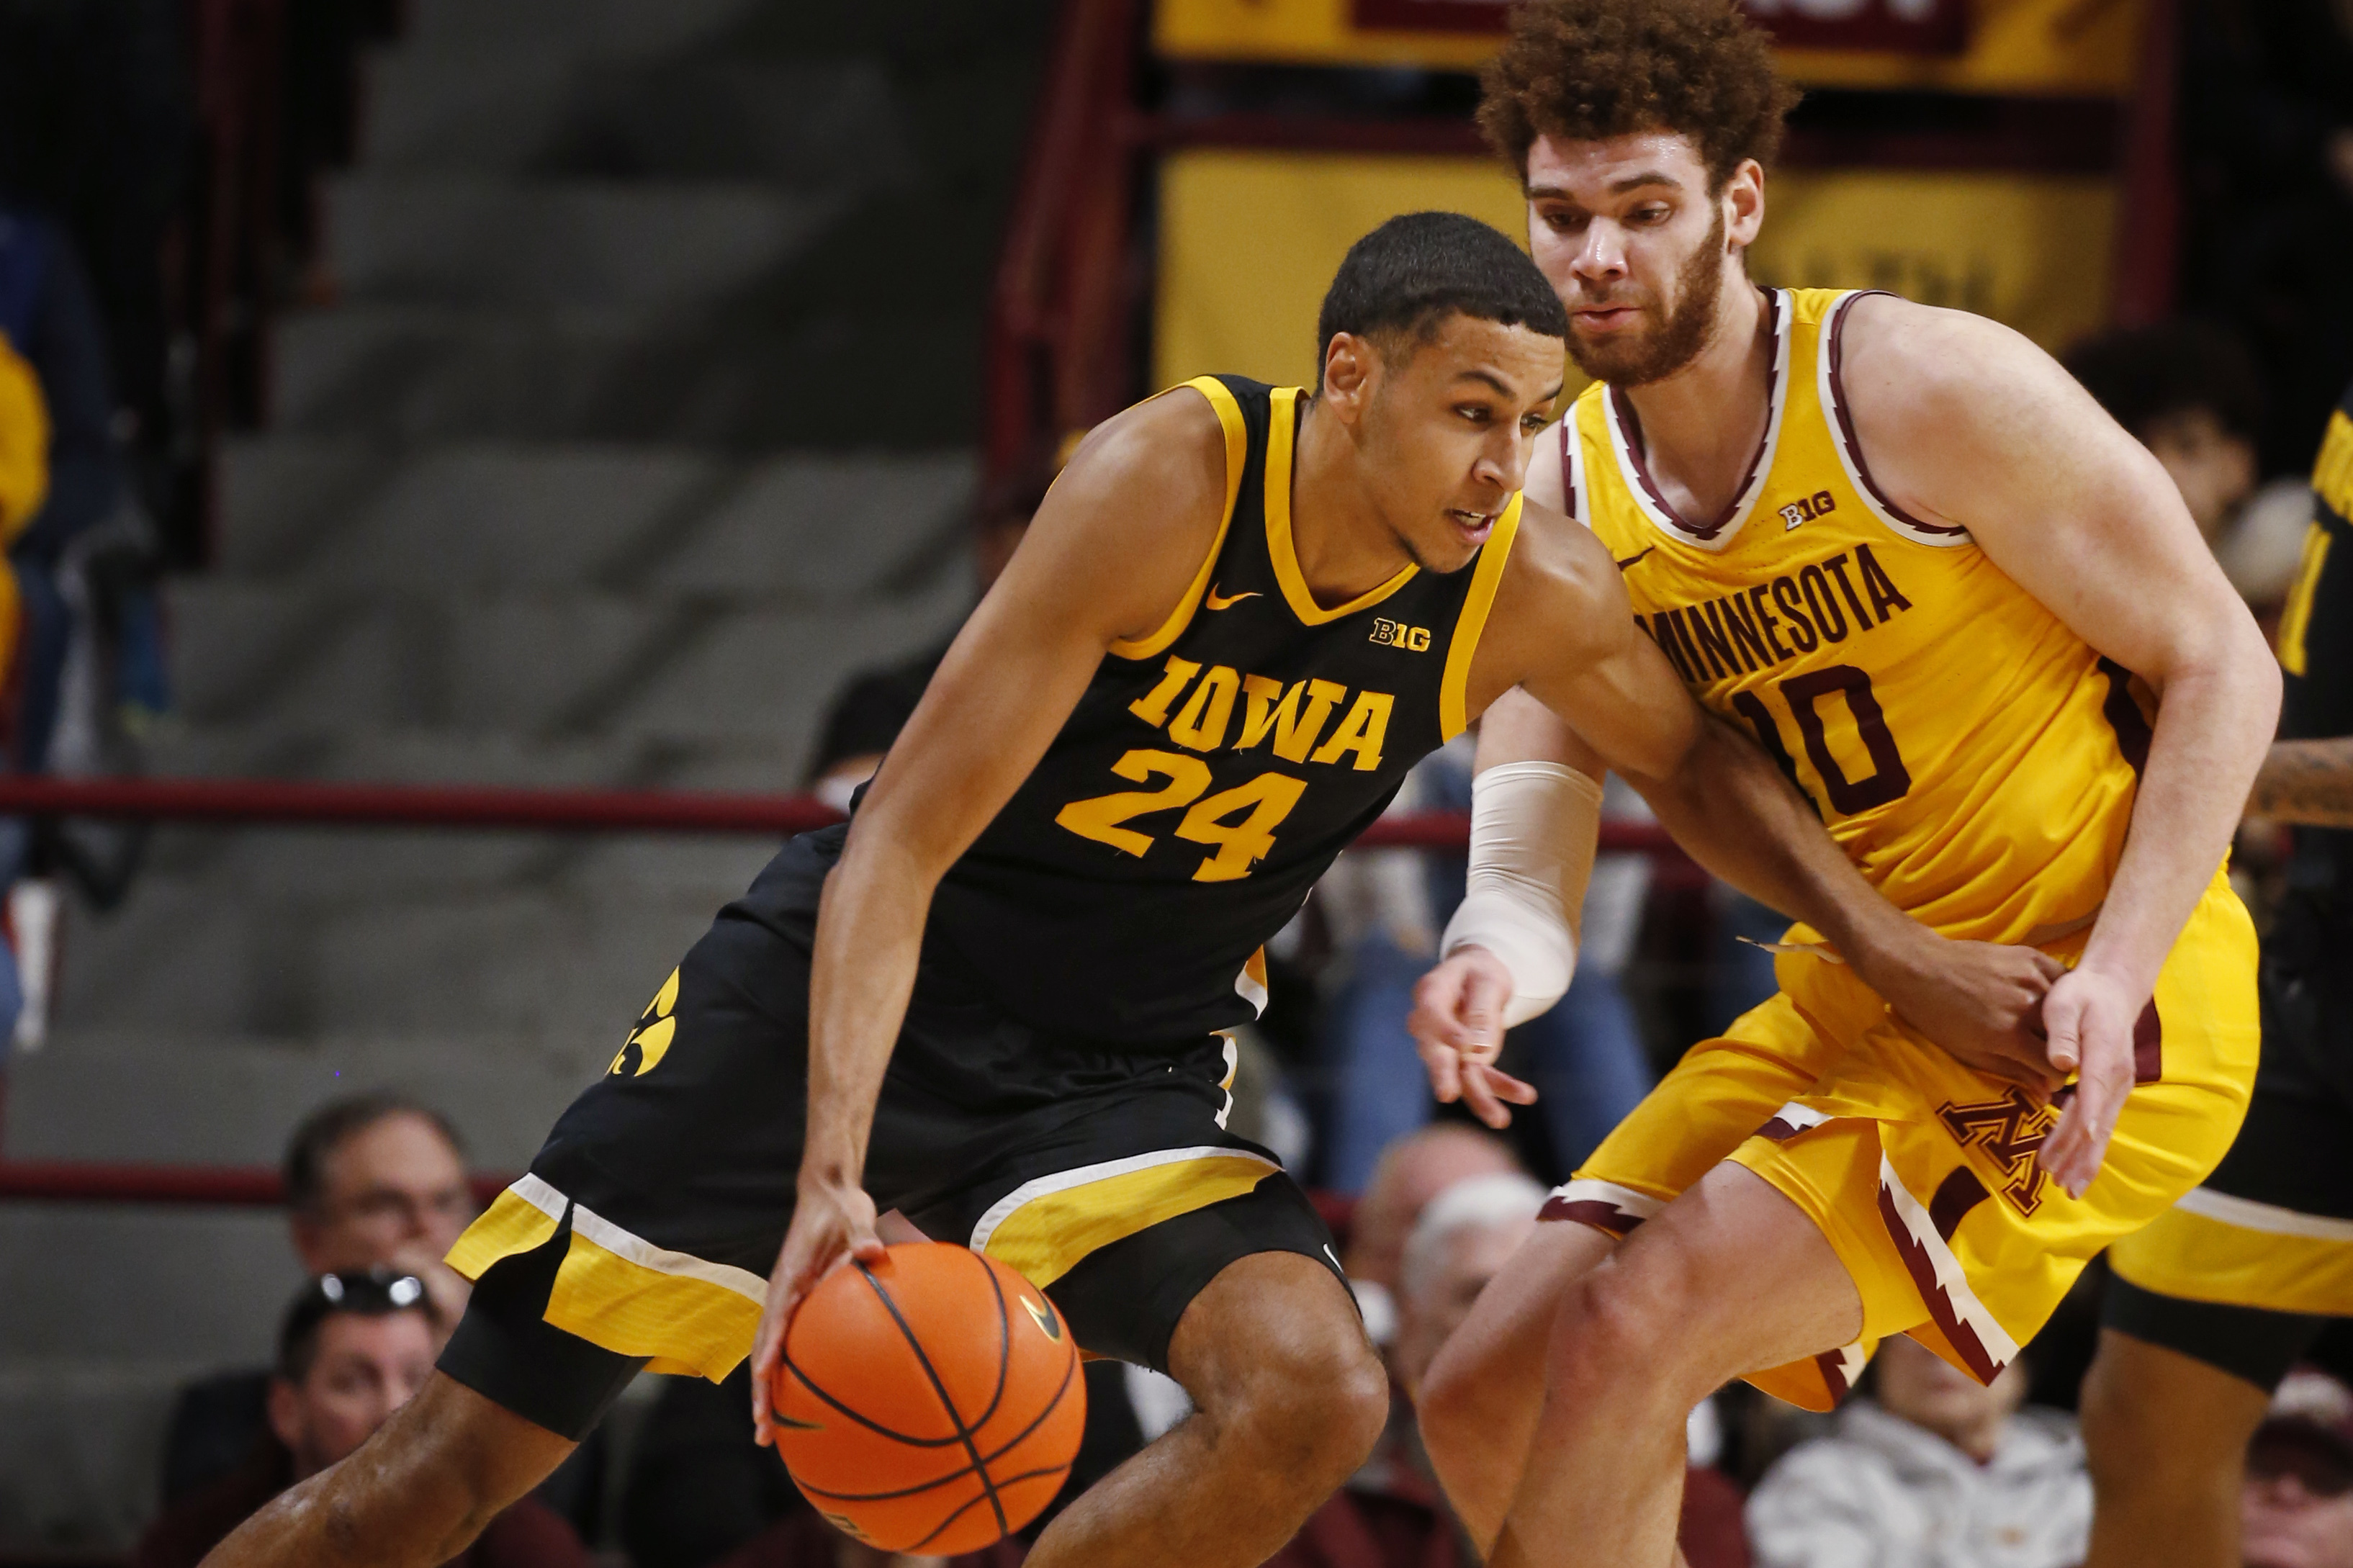 Why Kris Murray Returned for Another Season at Iowa